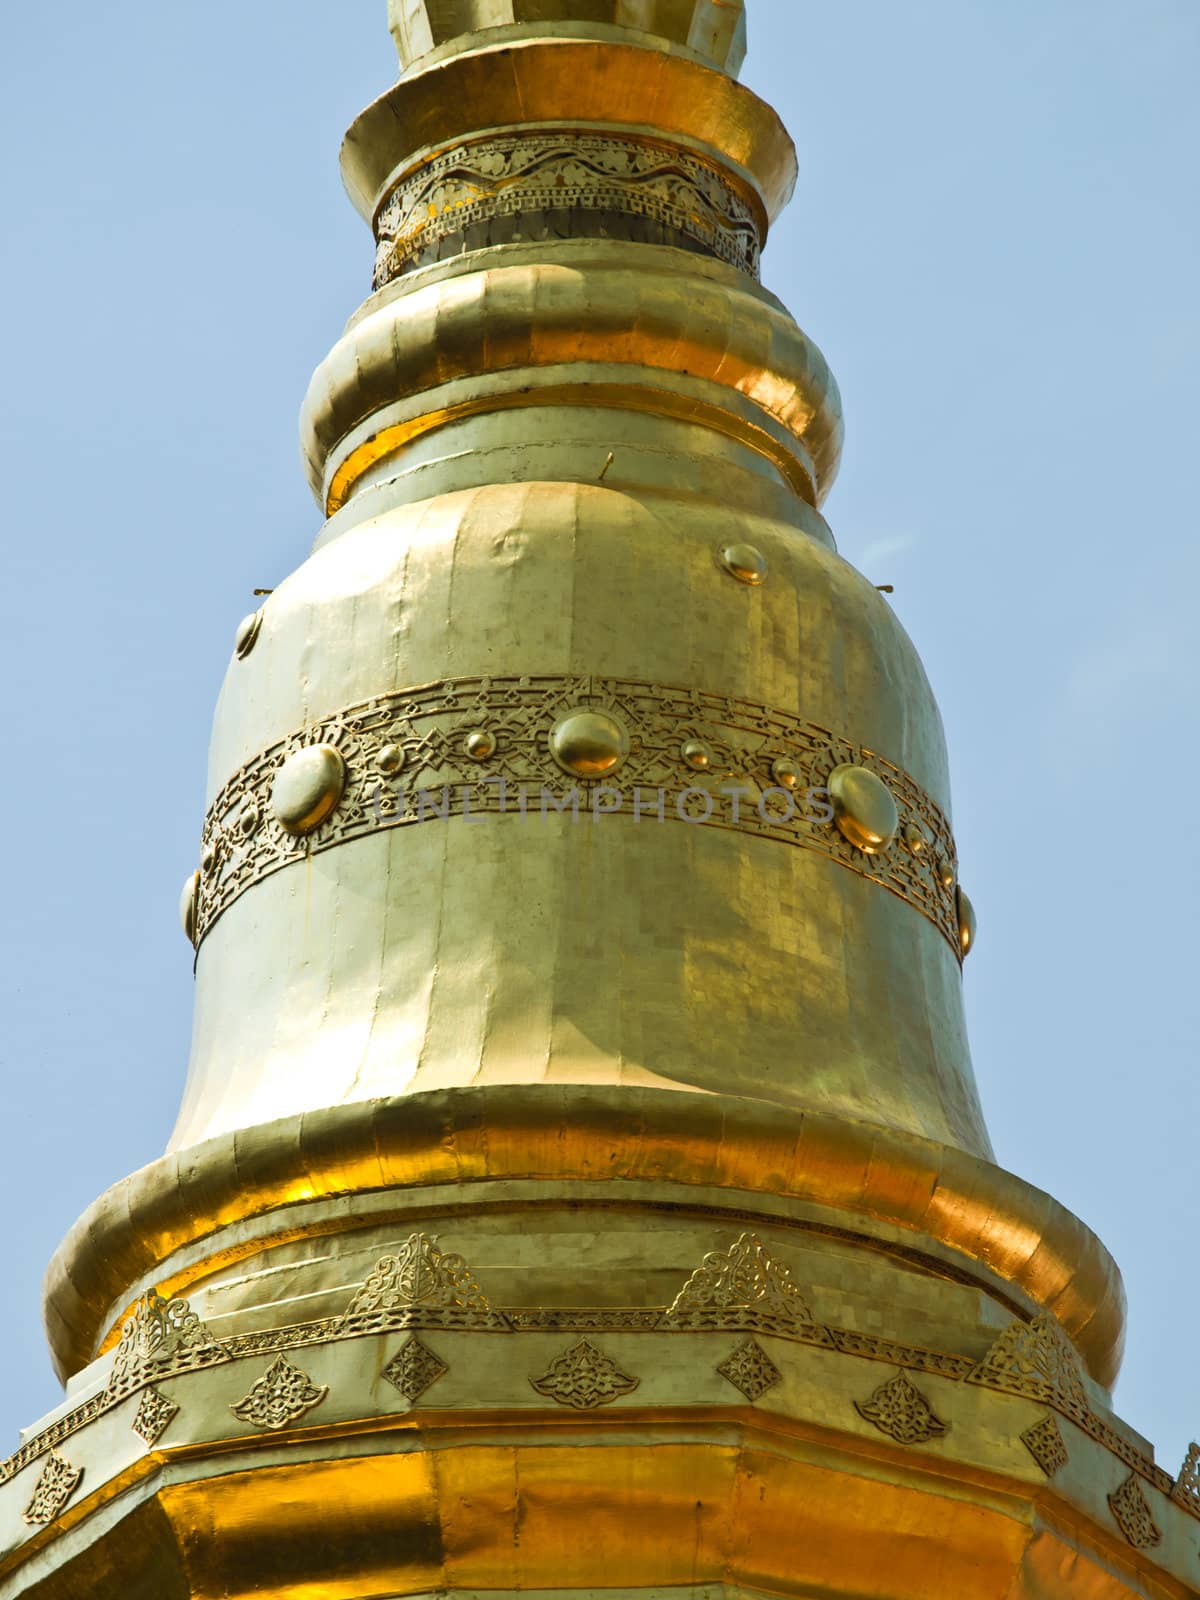 Closed up of golden pagoda, Wat Phrathat chomkitti temple in Chiang rai, Thailand.
any kind of art decorated in Buddhist church, temple etc.They are public domain or treasure of Buddhism, no restrict in copy of use.